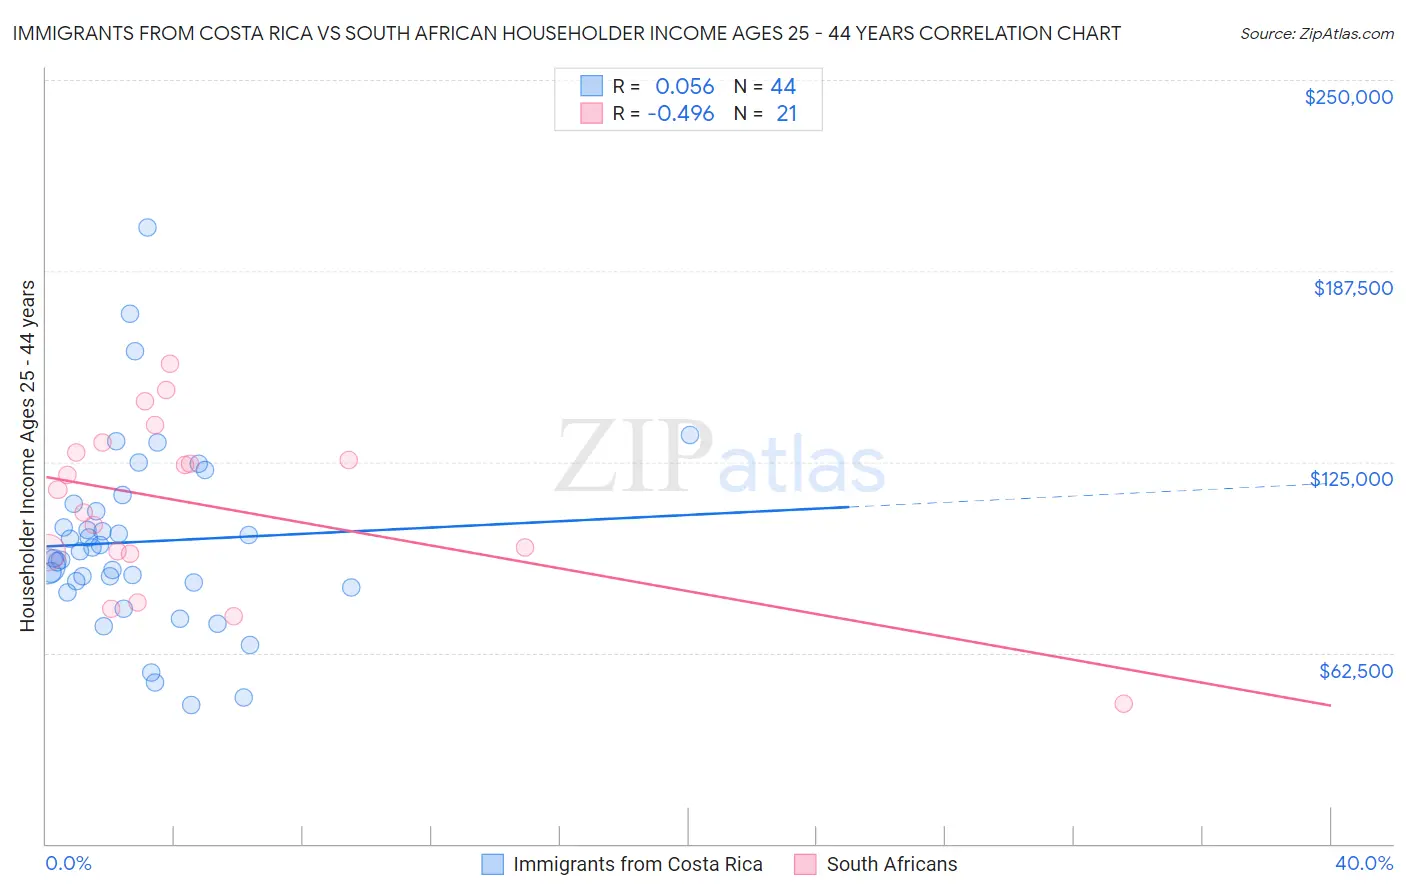 Immigrants from Costa Rica vs South African Householder Income Ages 25 - 44 years